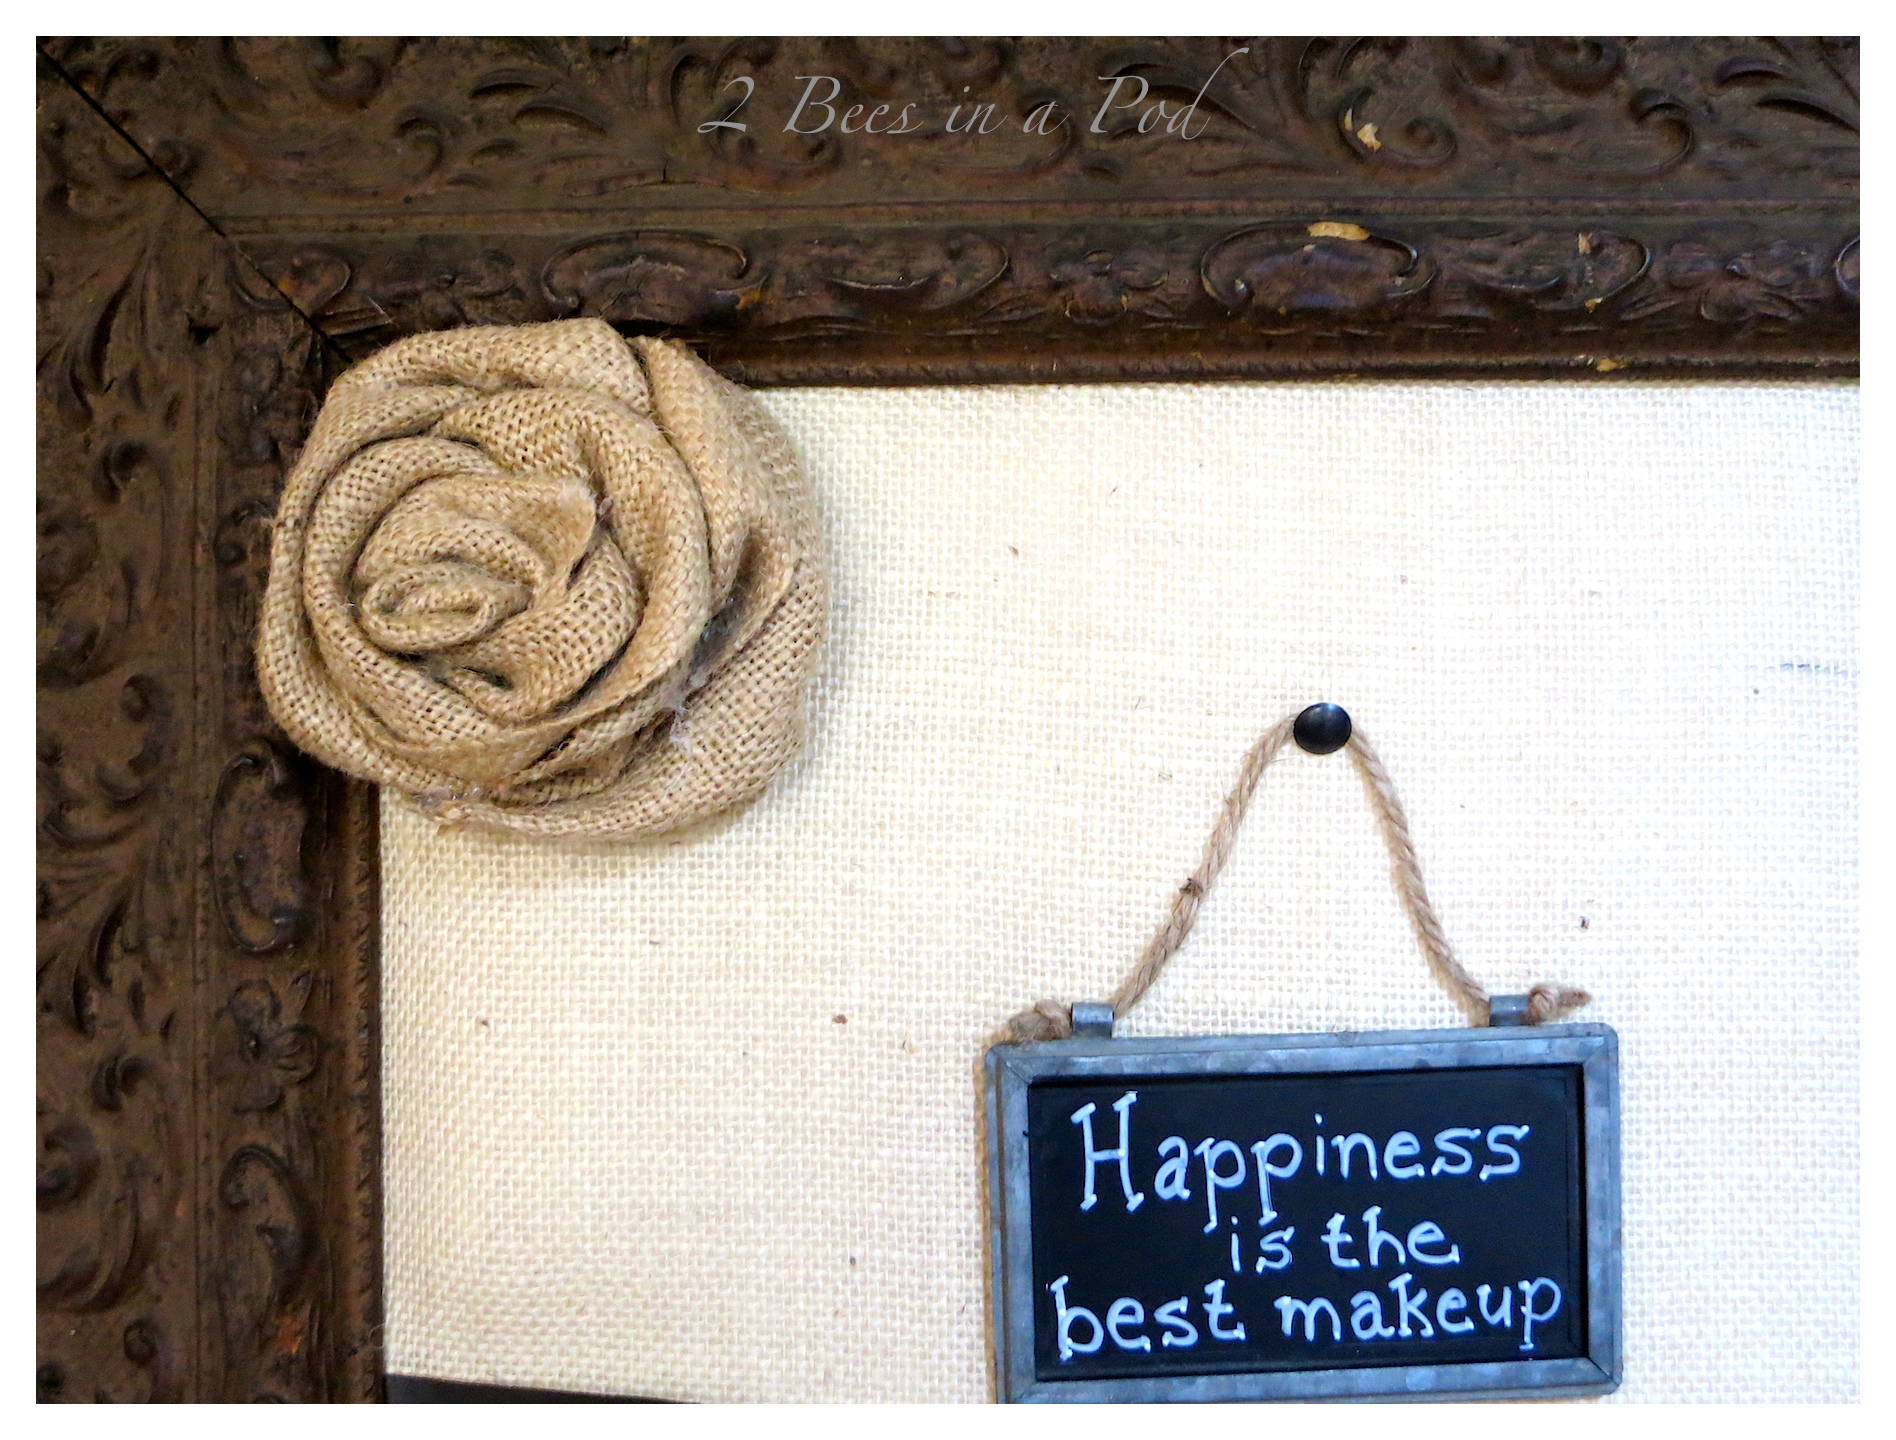 DIY burlap bulletin board. Made from a salvaged antique frame, burlap, foam board and batting. Cute decorated with vintage decor.